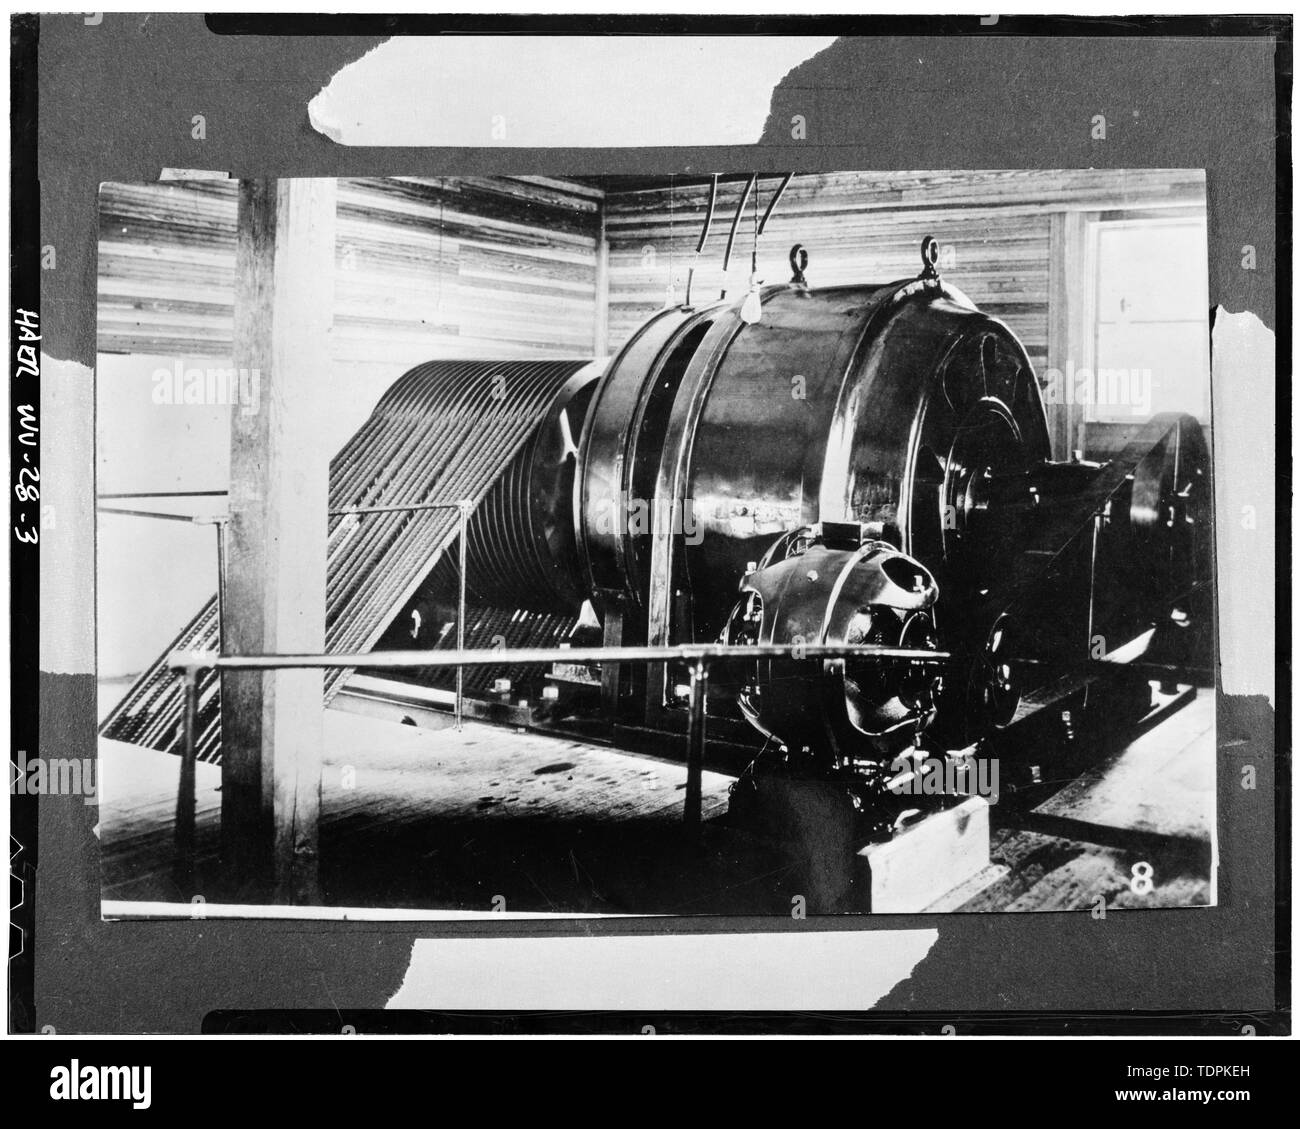 c. 1904. INTERIOR OF ORIGINAL POWER HOUSE, SHOWING A ROPE DRIVEN WARREN 450  KW, 12,000 VOLT (LATER REWOUND TO 2,200 VOLT), 3 PHASE, 60 CYCLE, A.C.  GENERATOR, WITH BELT-DRIVEN WARREN 7-1-2 KW,